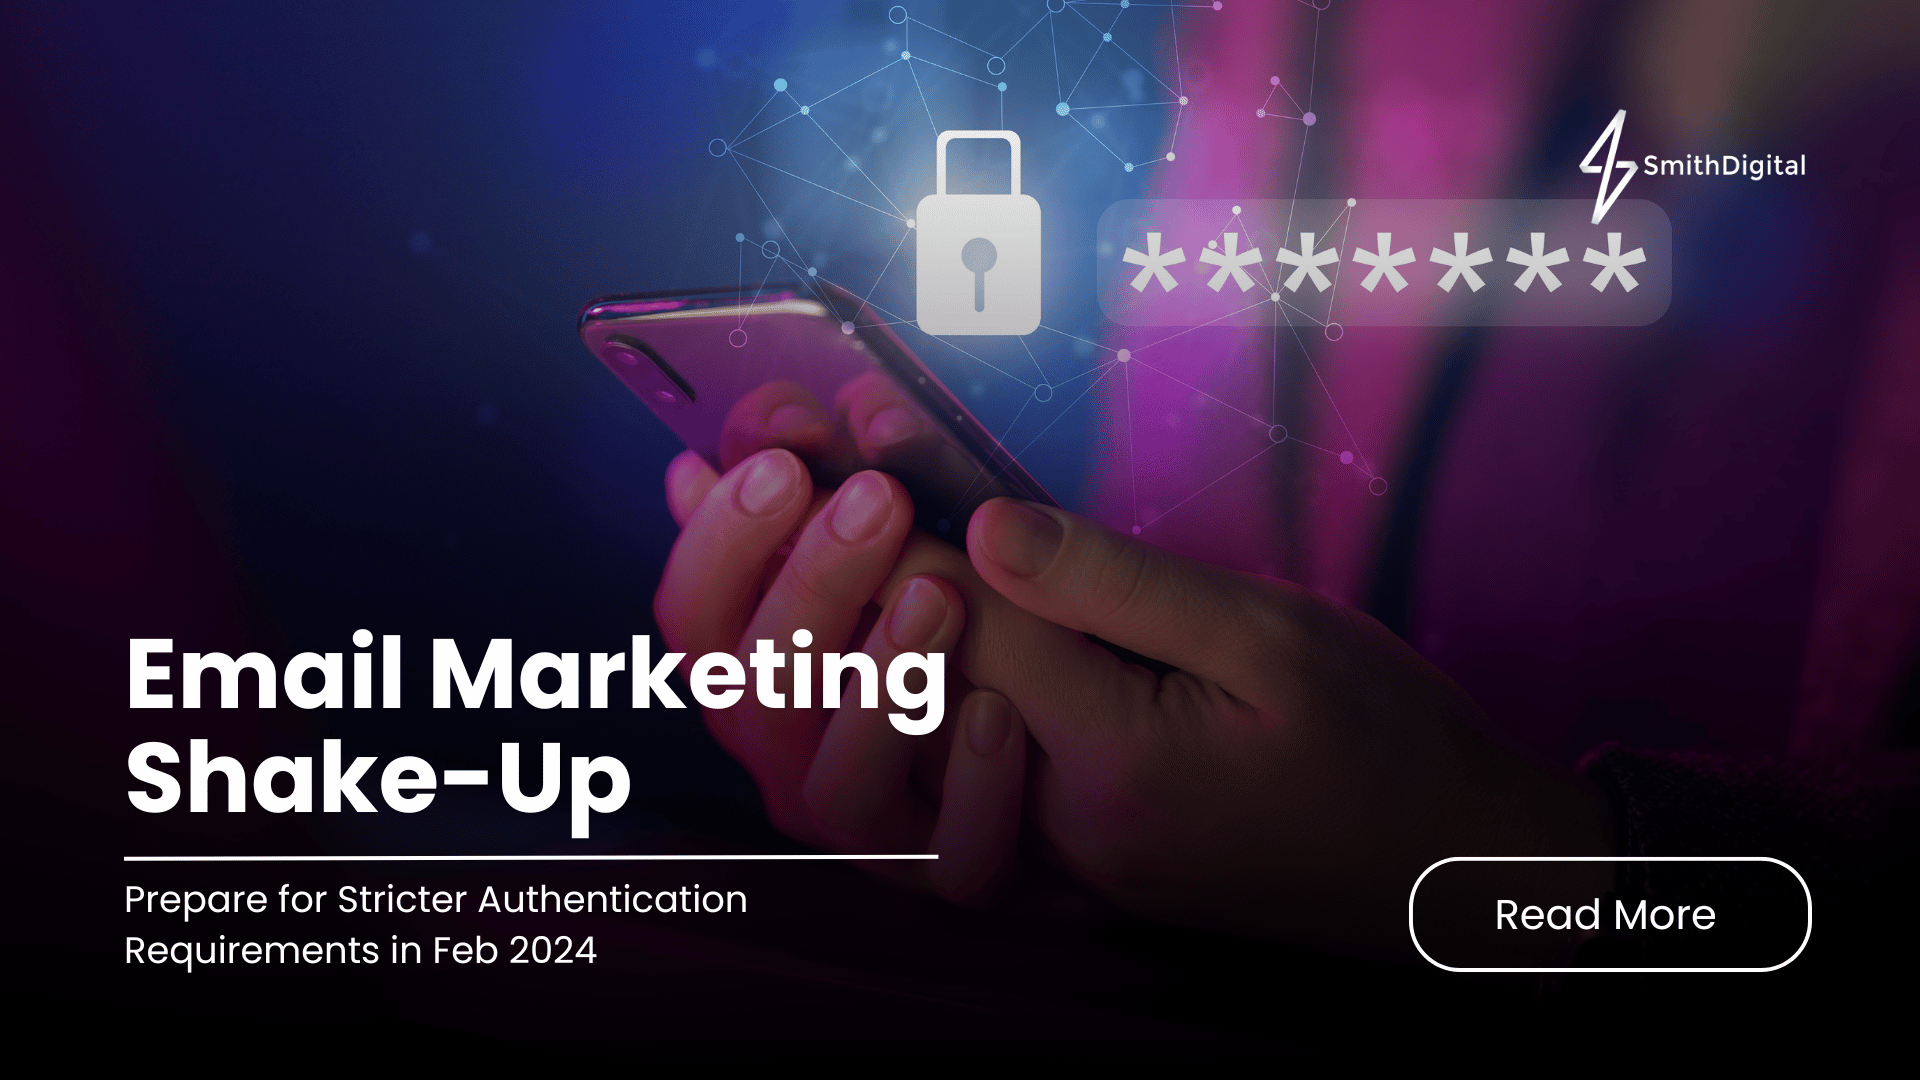 Email Marketing Shake-Up: Prepare for Stricter Authentication Requirements in Feb 2024